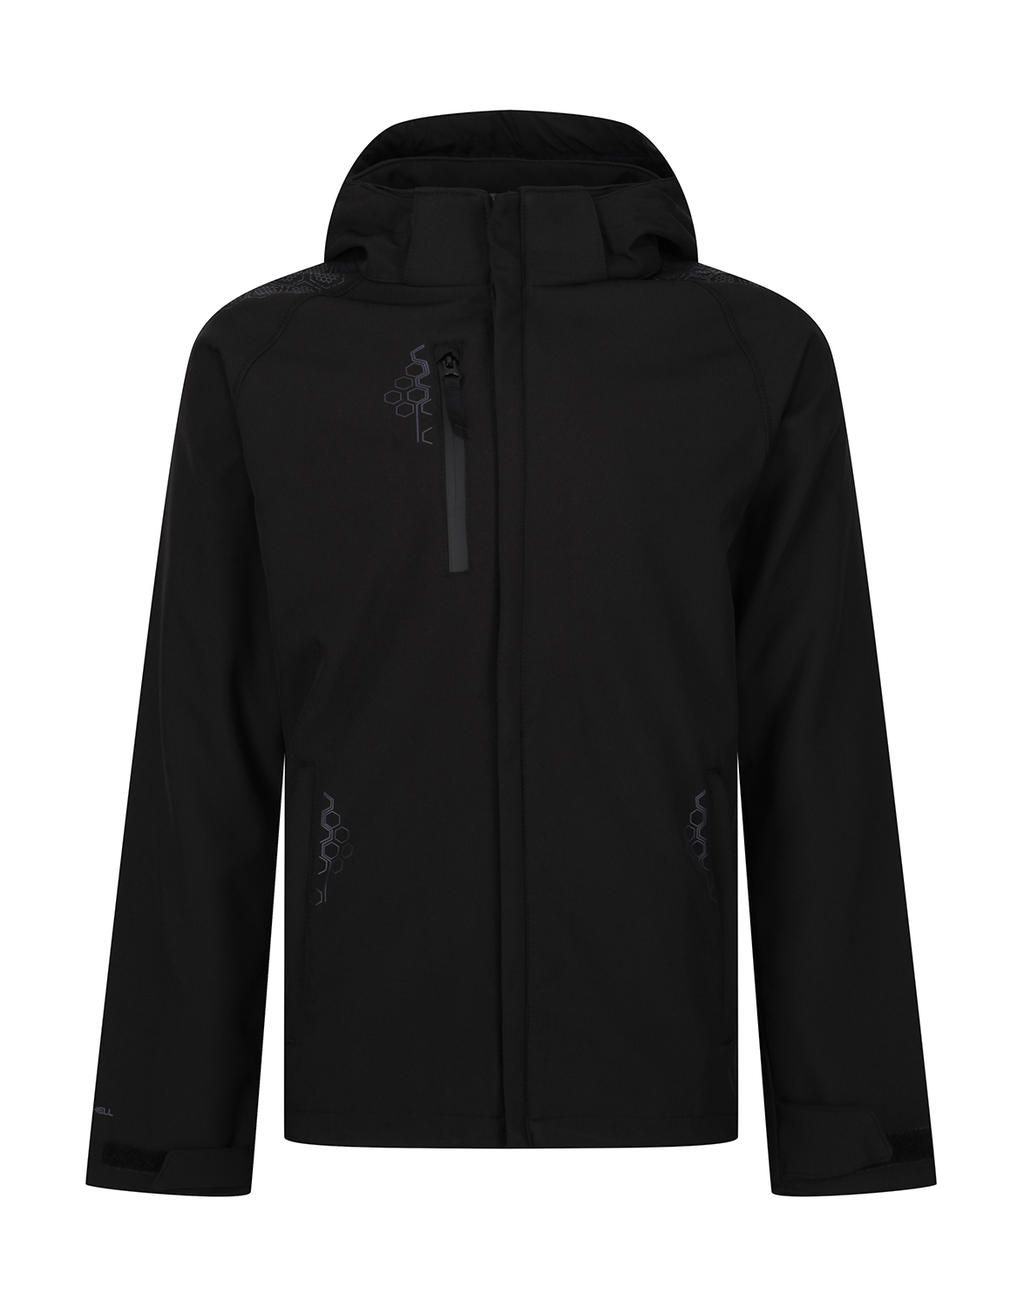  Repeller Lined Hooded Softshell in Farbe Black